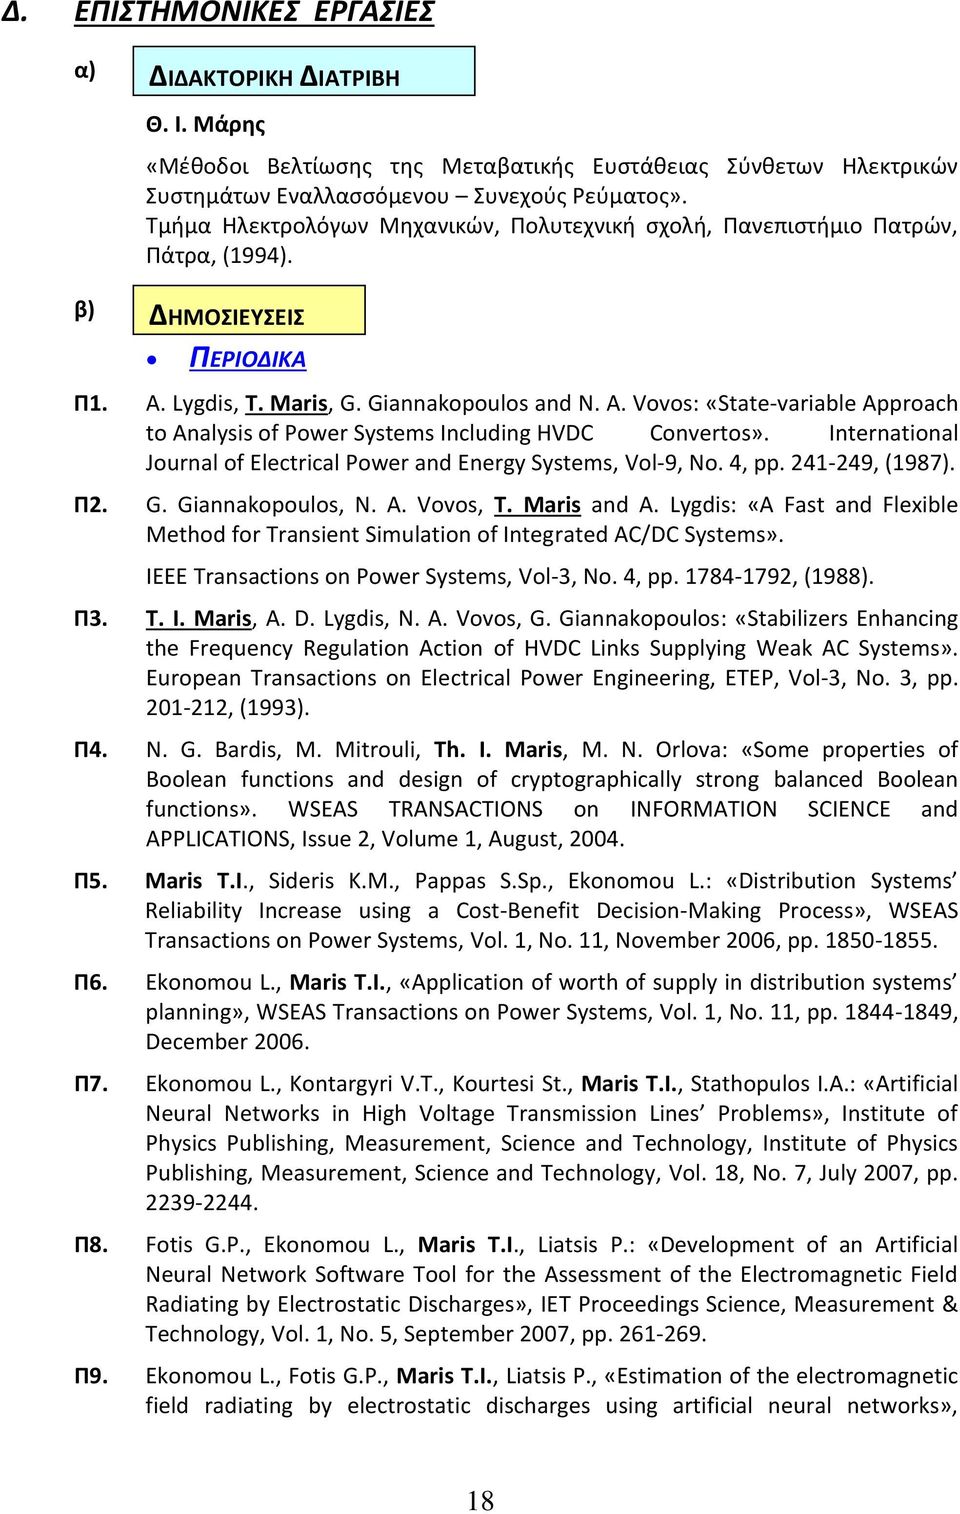 Lygdis, T. Maris, G. Giannakopoulos and N. A. Vovos: «State-variable Approach to Analysis of Power Systems Including HVDC Convertos».